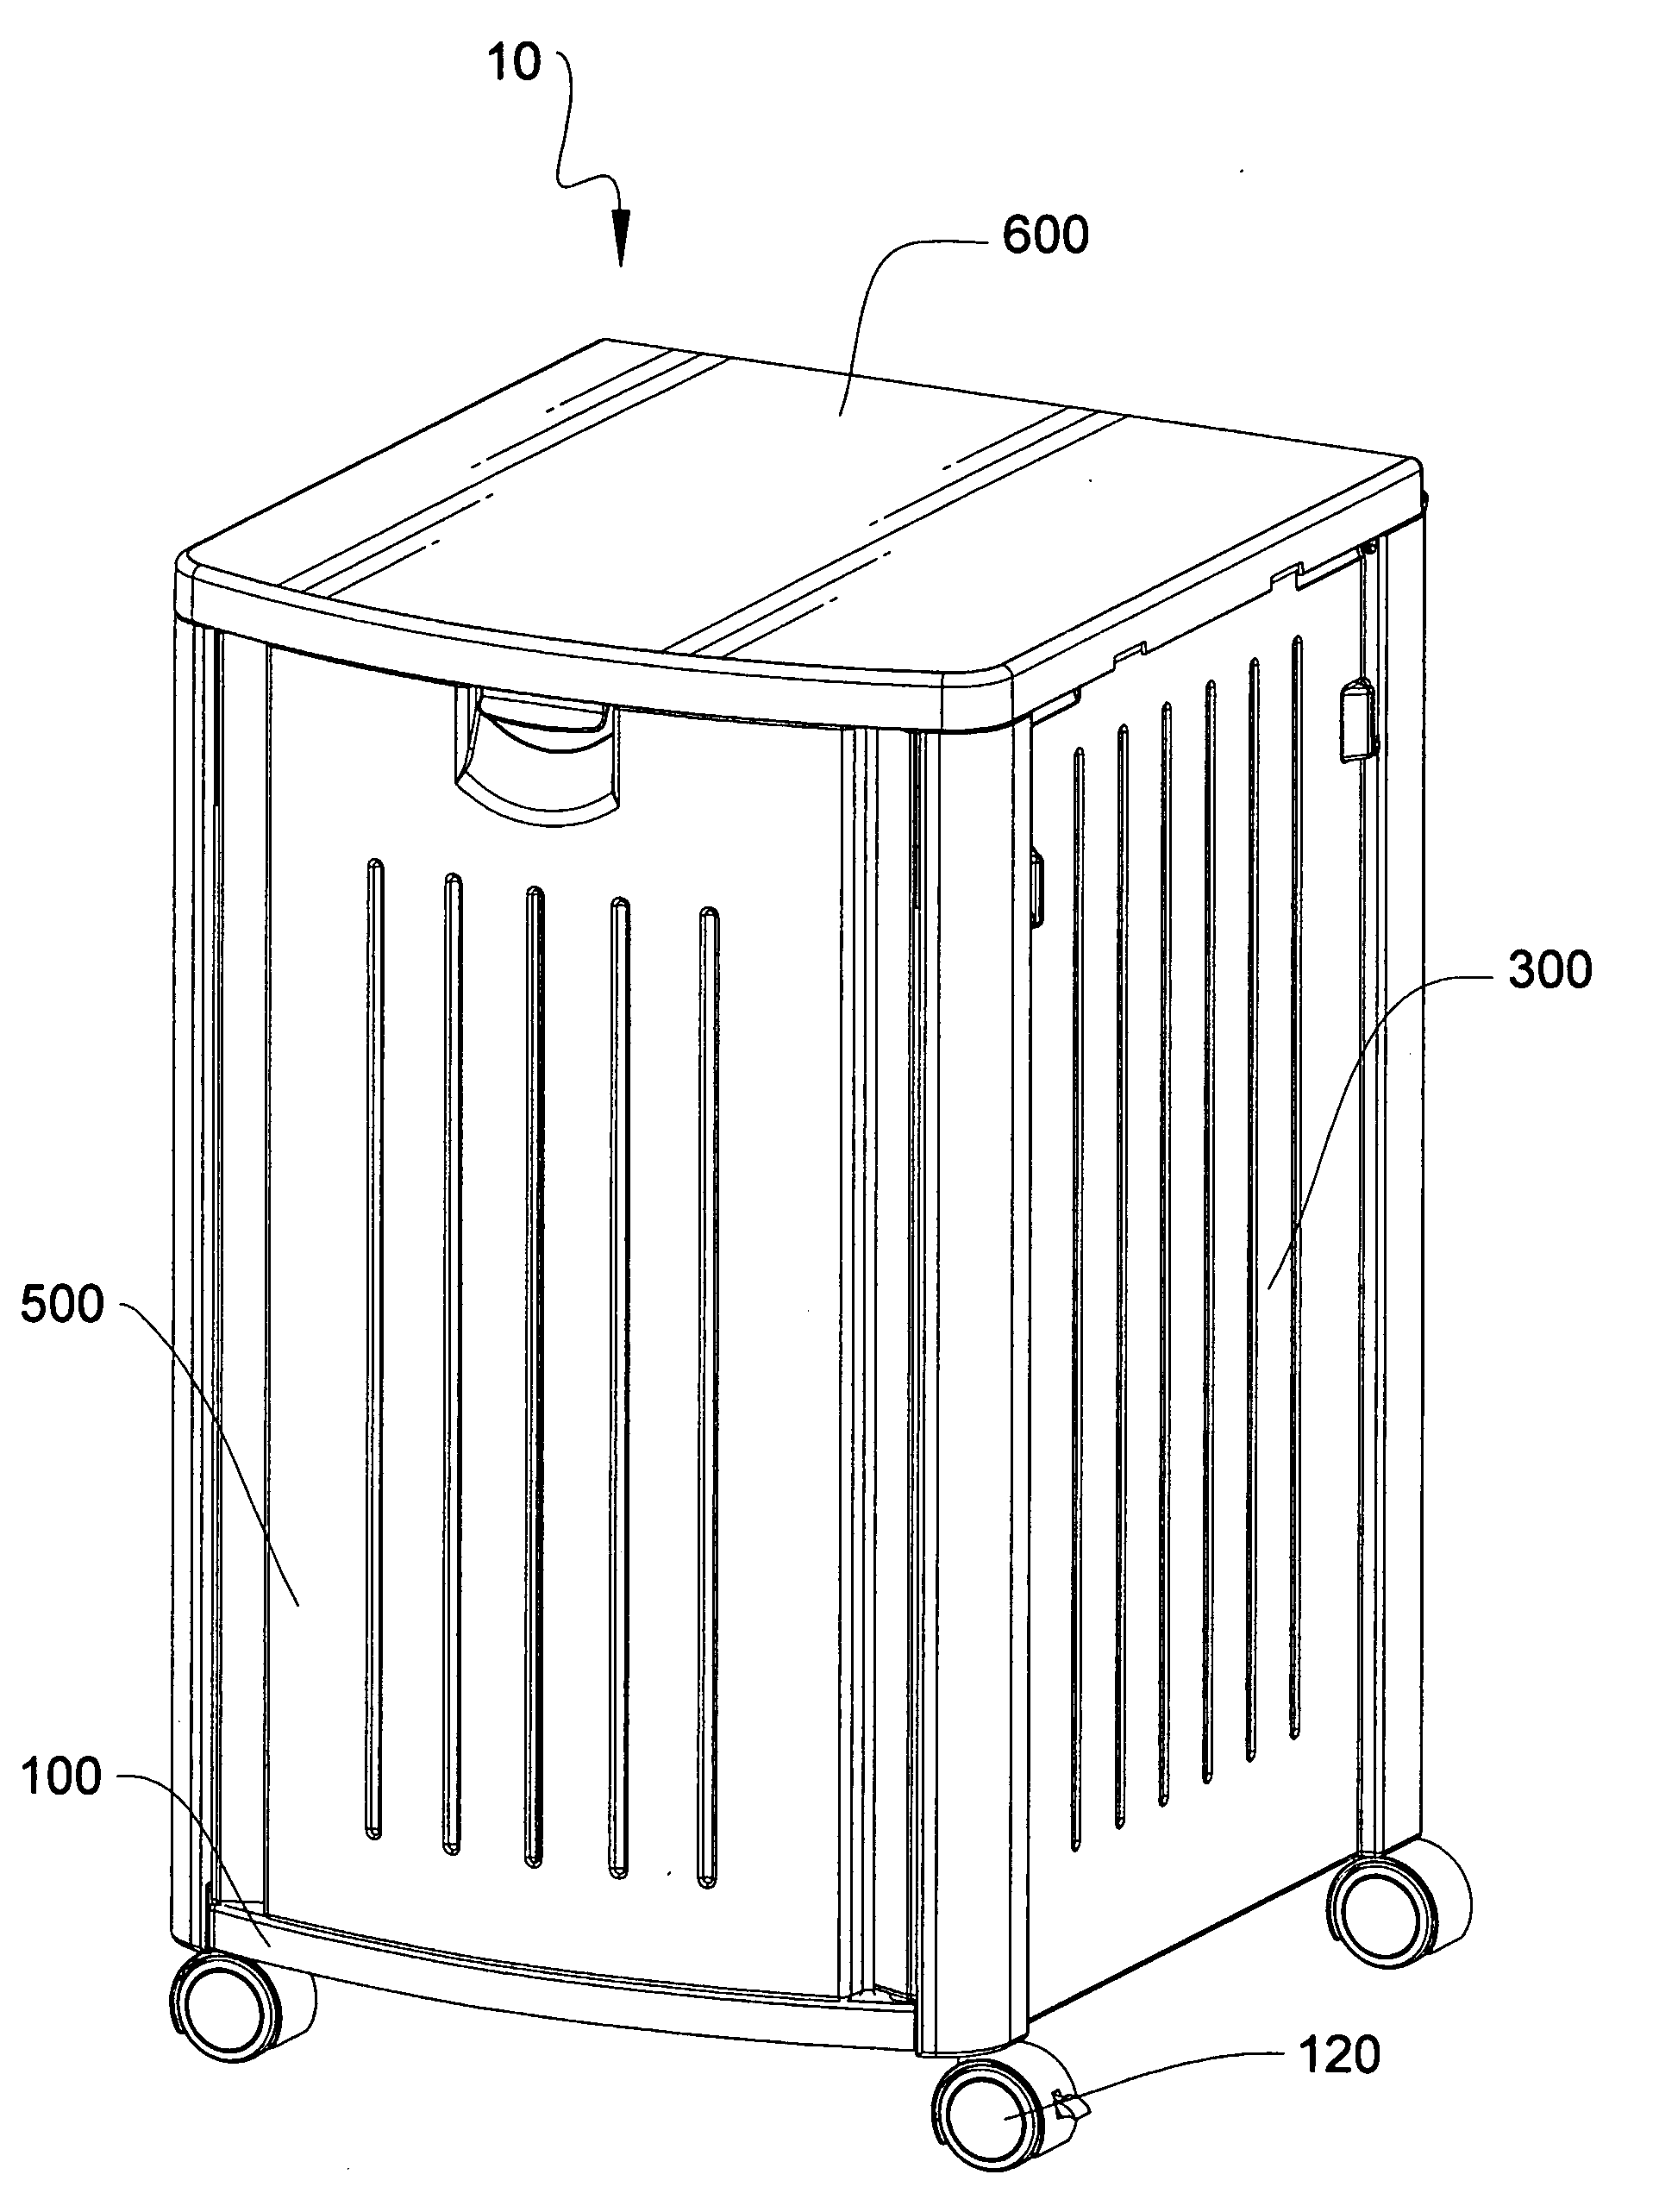 Trash container assembly